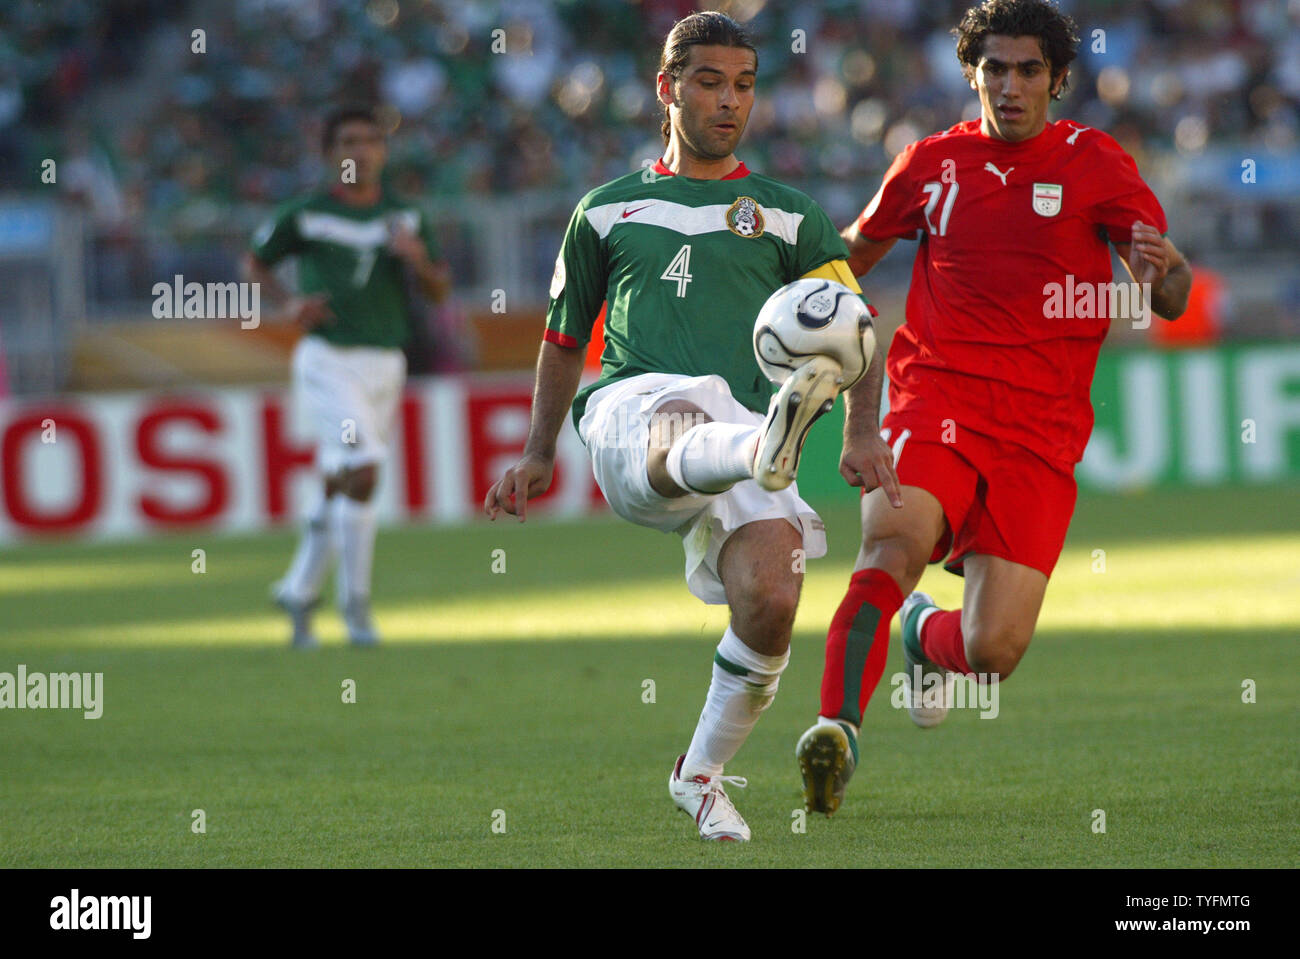 Mexican player Rafael Marquez (4) dominates Irans Mehrzad Madanchi (21) in a World Cup match in Nuernberg on June 11, 2006. Mexico won 3-1.  (UPI  Photo/Arthur Thill) Stock Photo